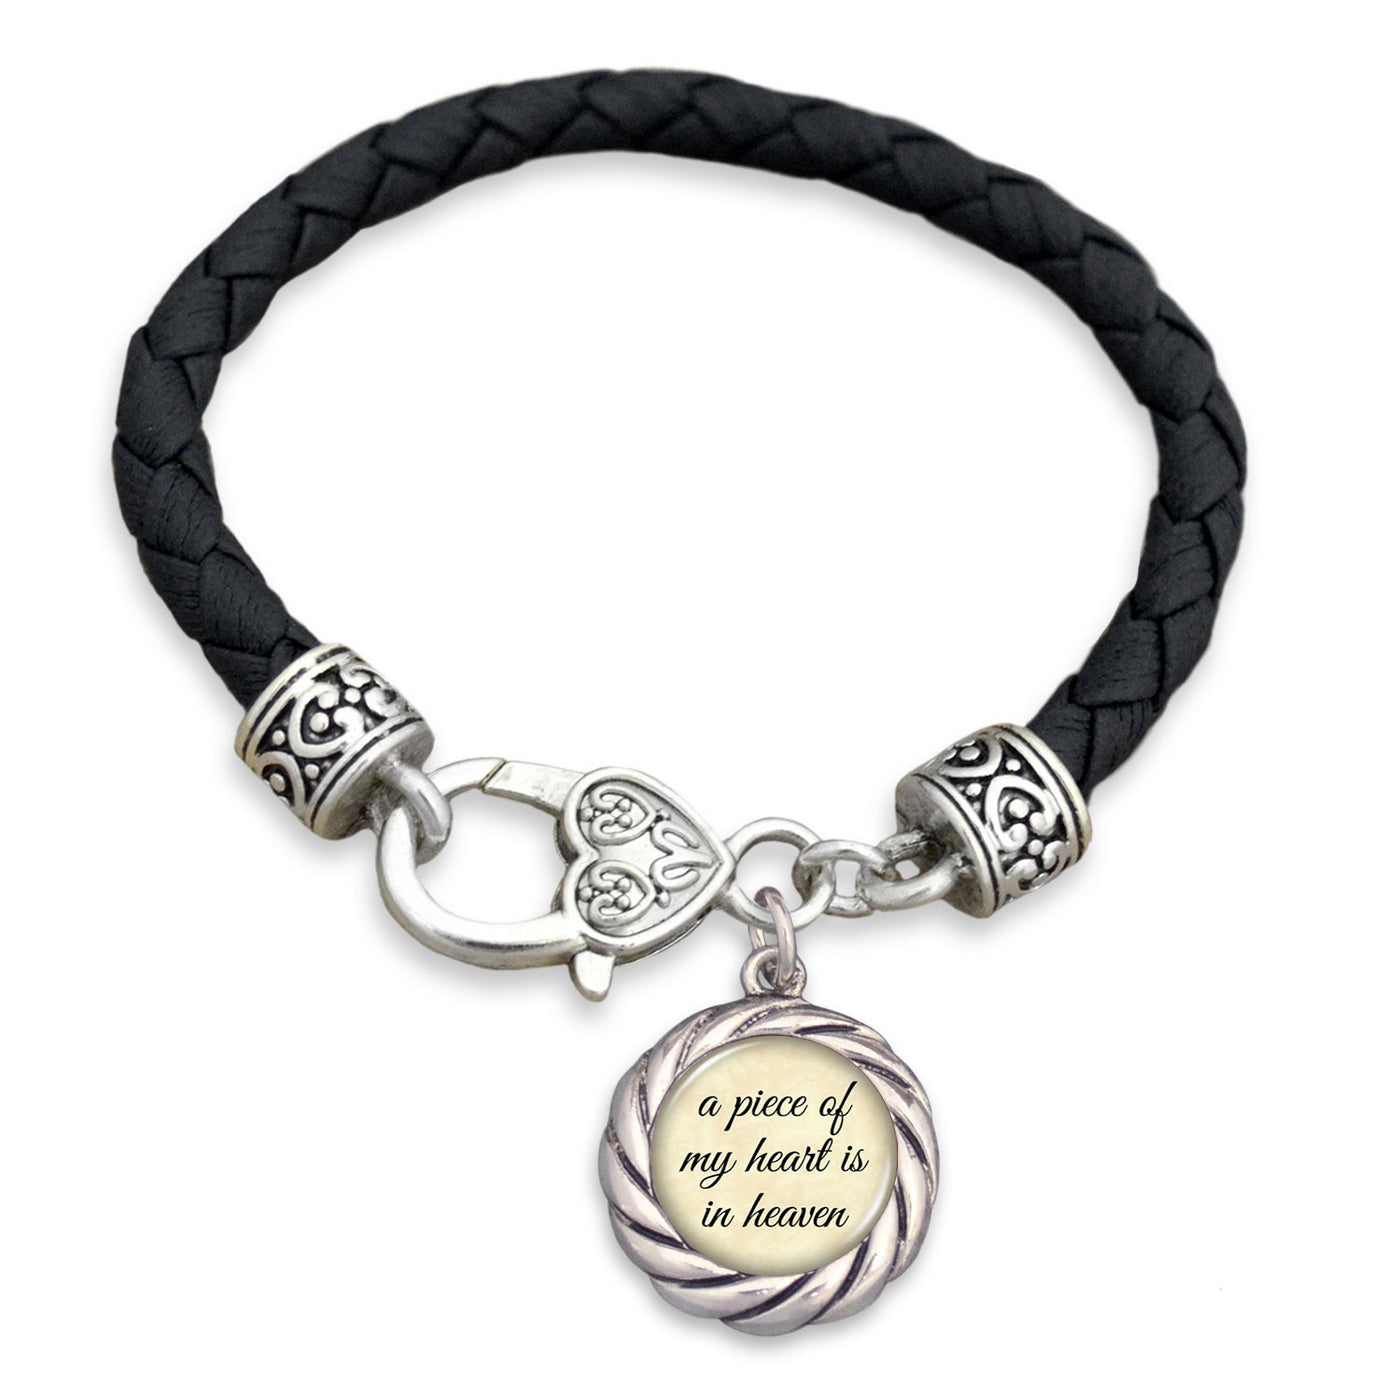 A Piece Of My Heart Is In Heaven Leather Toggle Bracelet